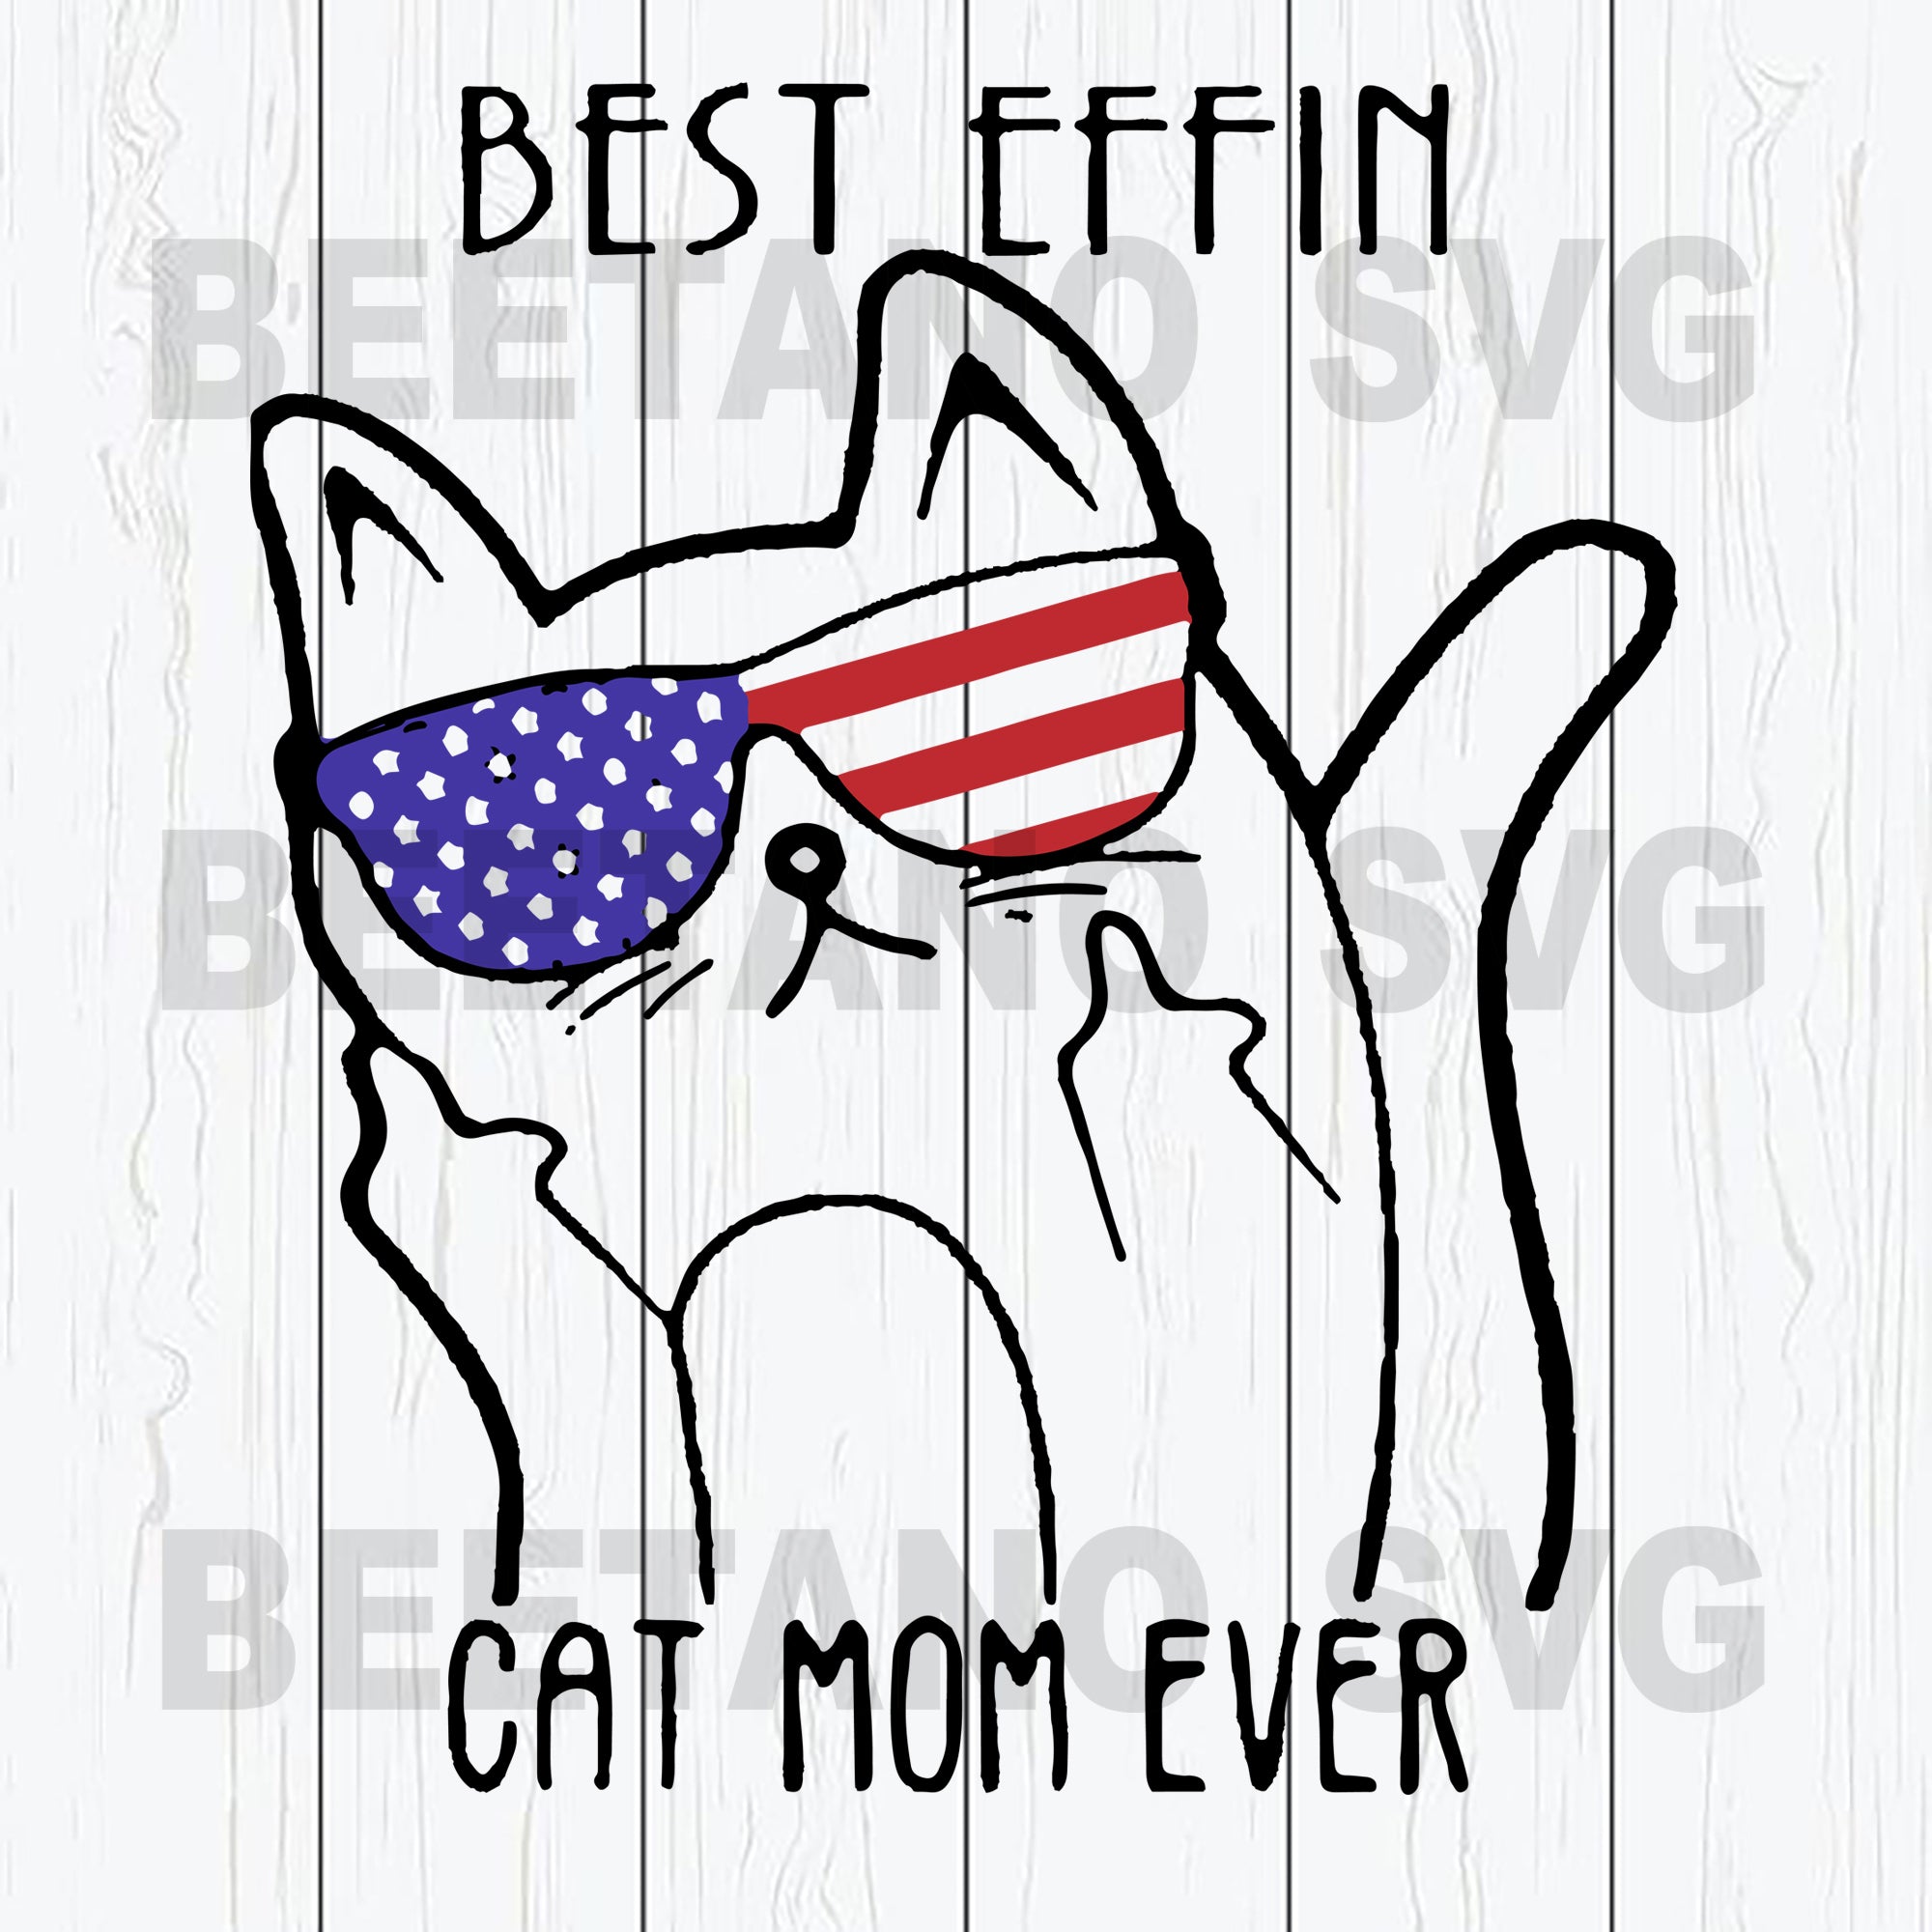 Download Best Cat Mom Ever High Quality Svg Cut Files Best For Unique Craft